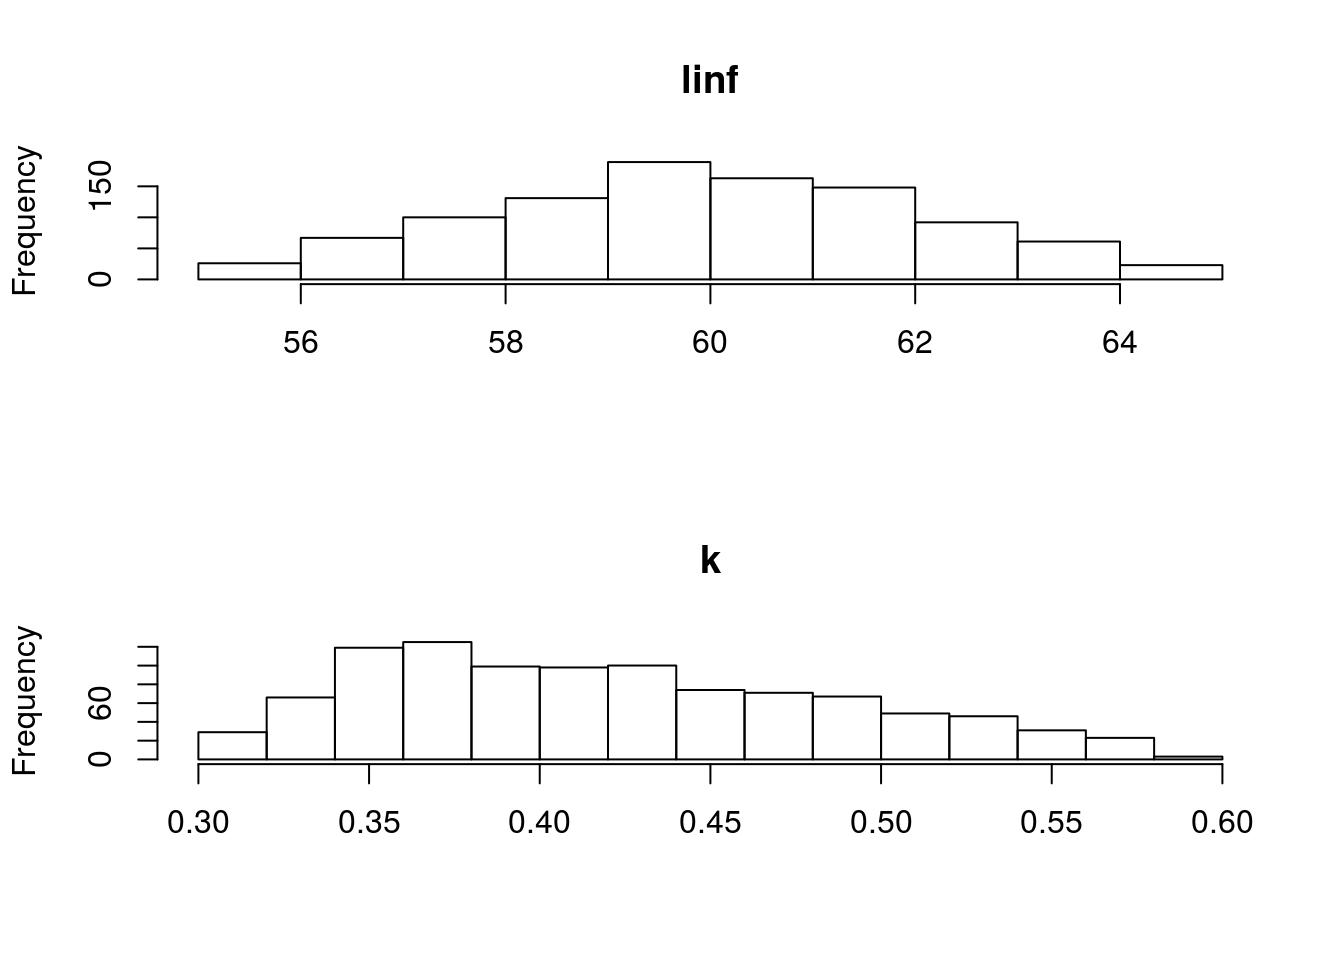 Marginal distributions of the parameters for Gislason's second natural mortality model using a triangle distribution.